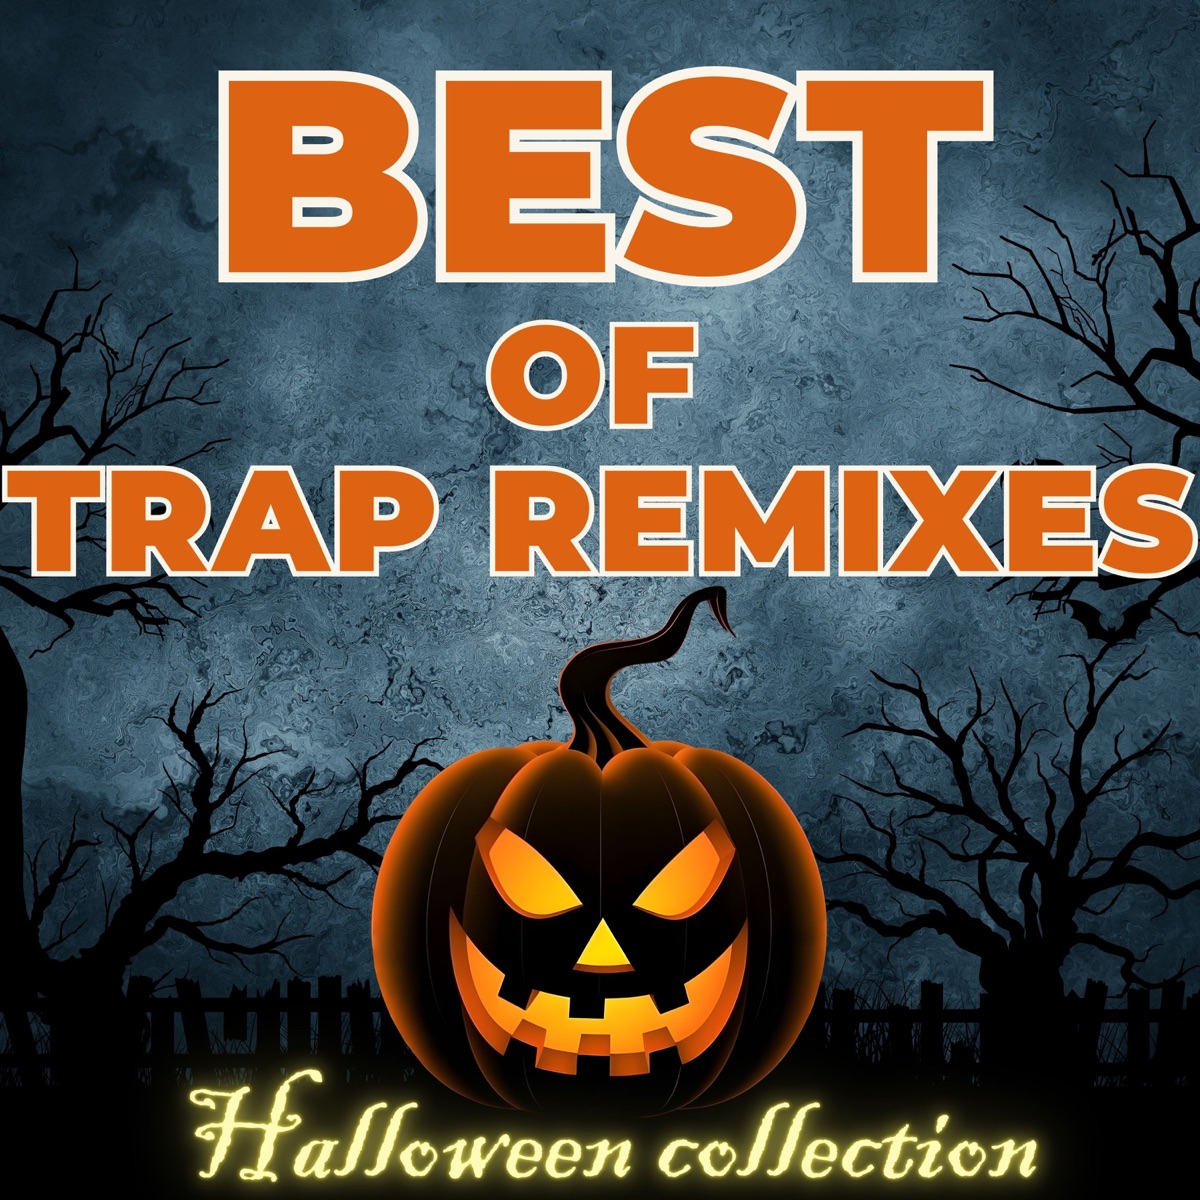 Best of Trap Remixes: Halloween Collection - Album by Trap Remix Guys -  Apple Music